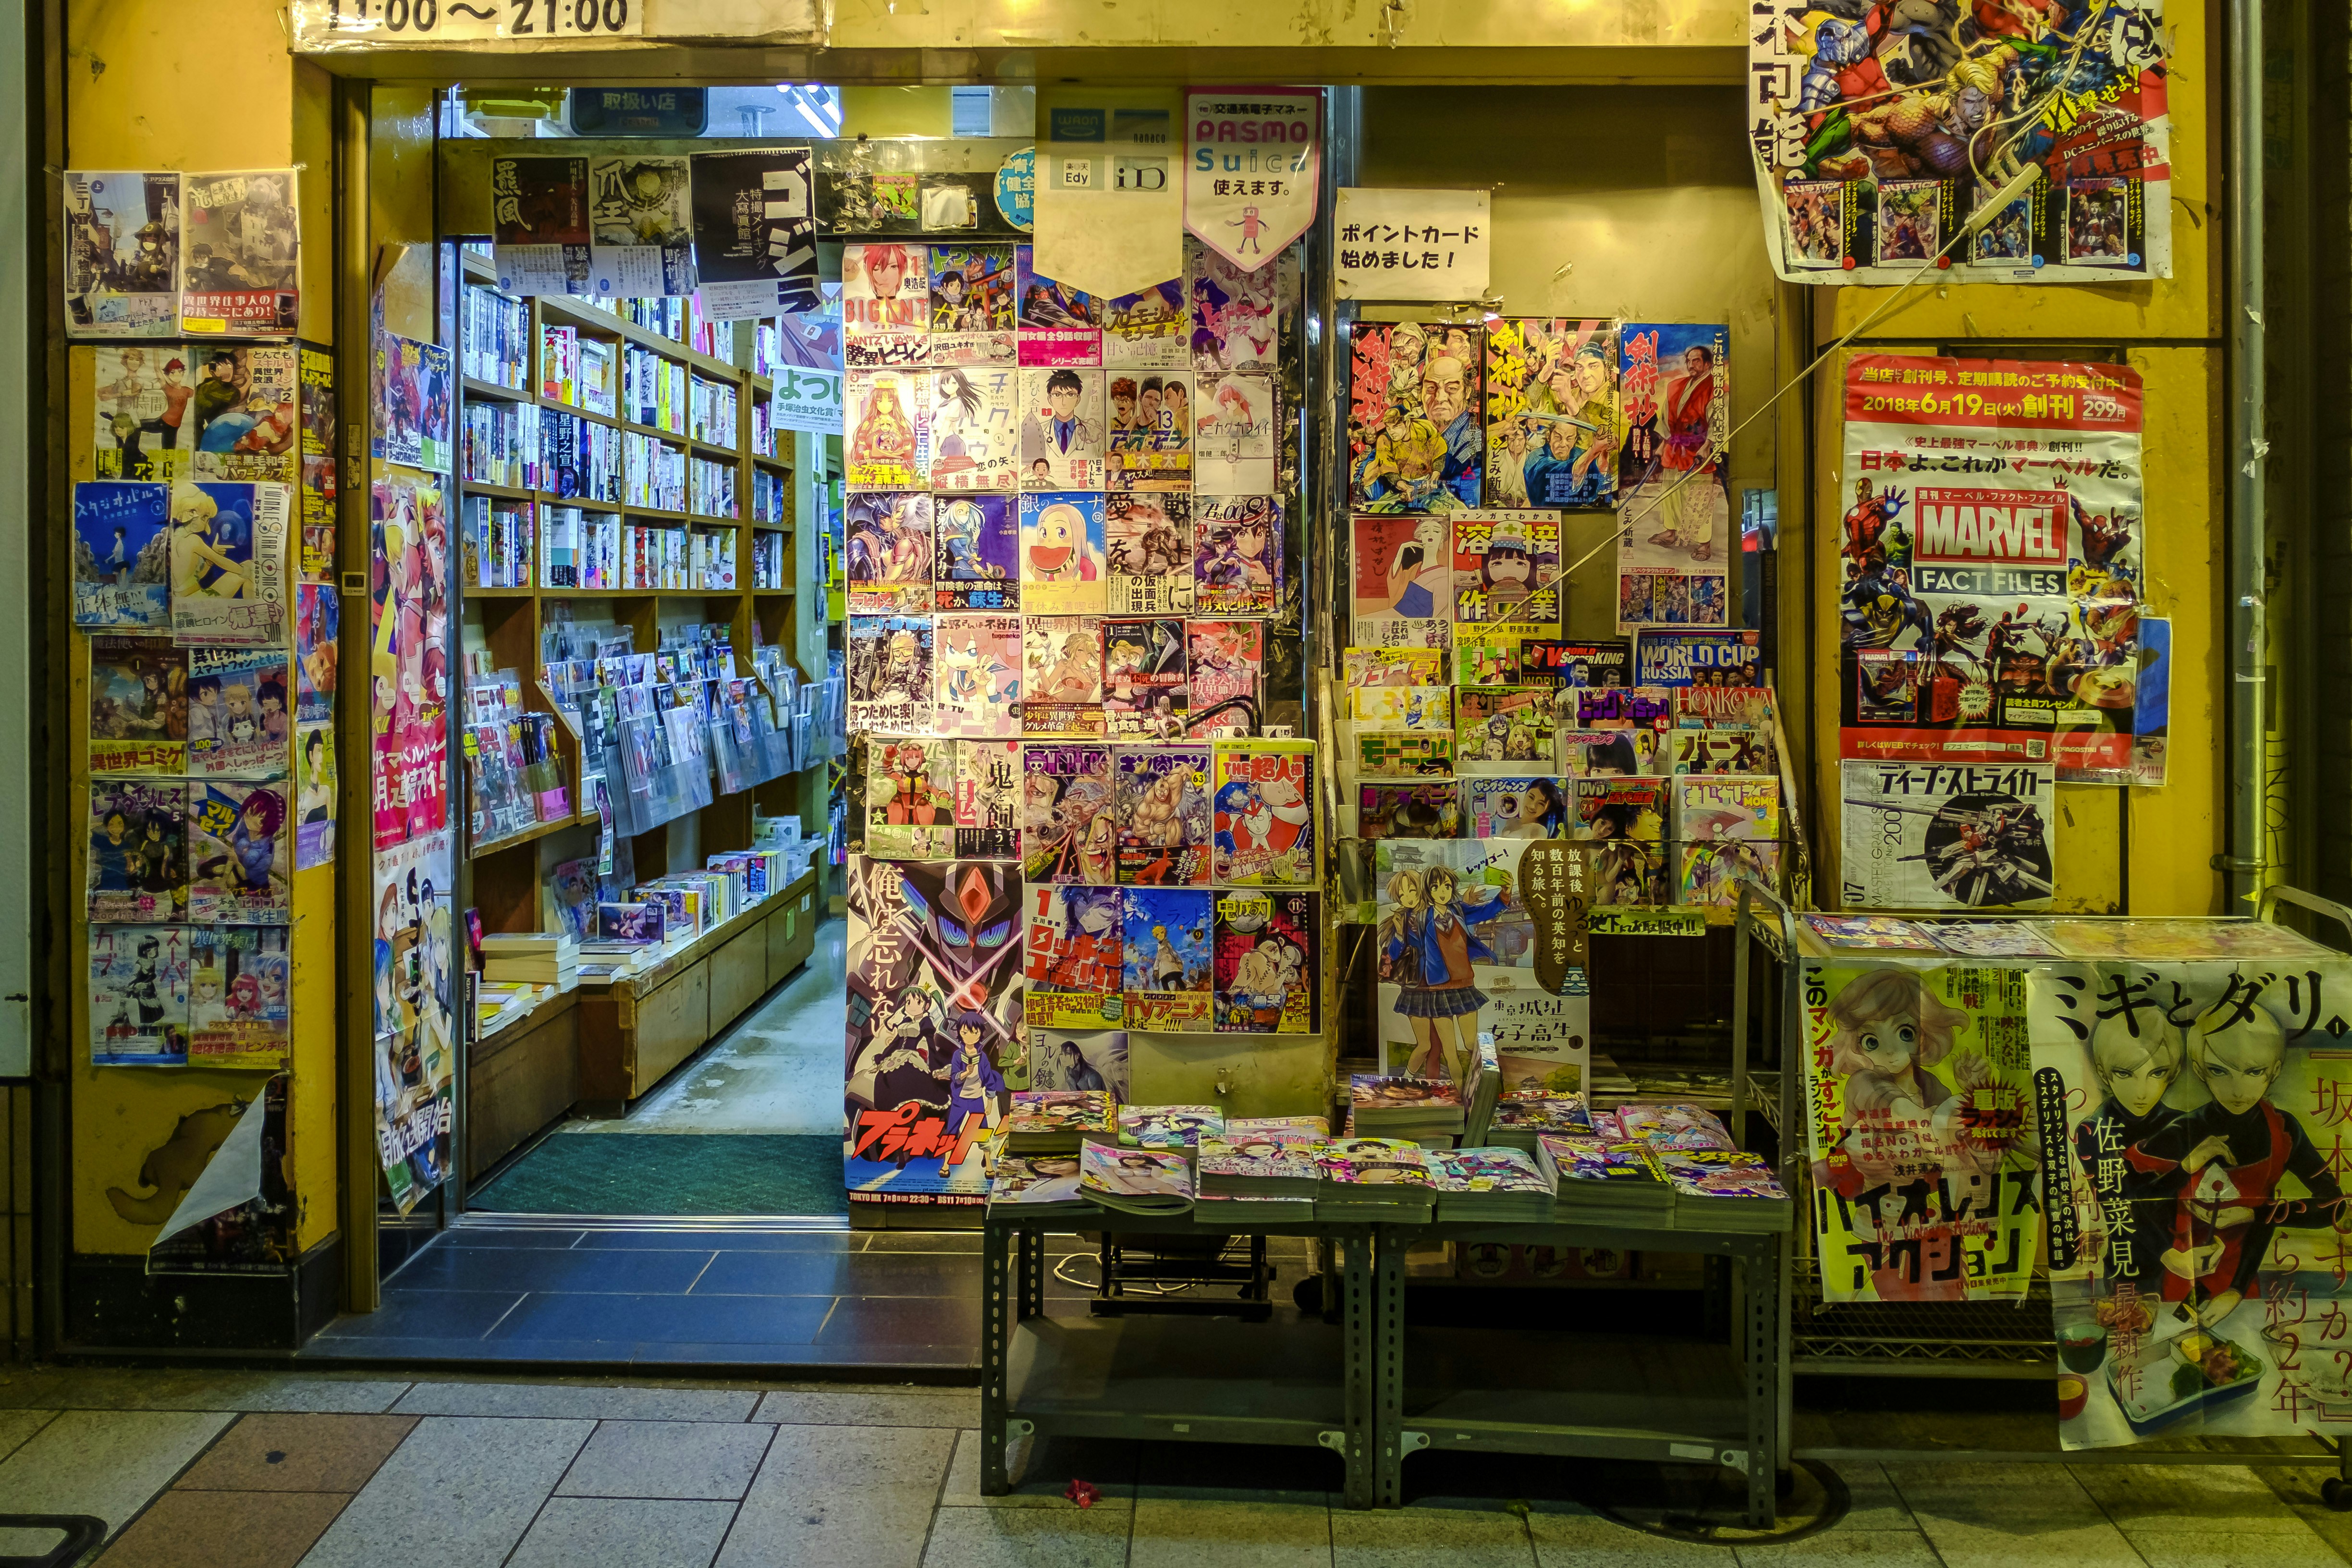 Comic book store in Tokyo Japan.Tokyo is the combination of 26 neighbourhoods, every singel one with it's own identity. Every neighbourhood has a commercial area the has neon, shops, restaurants and people.